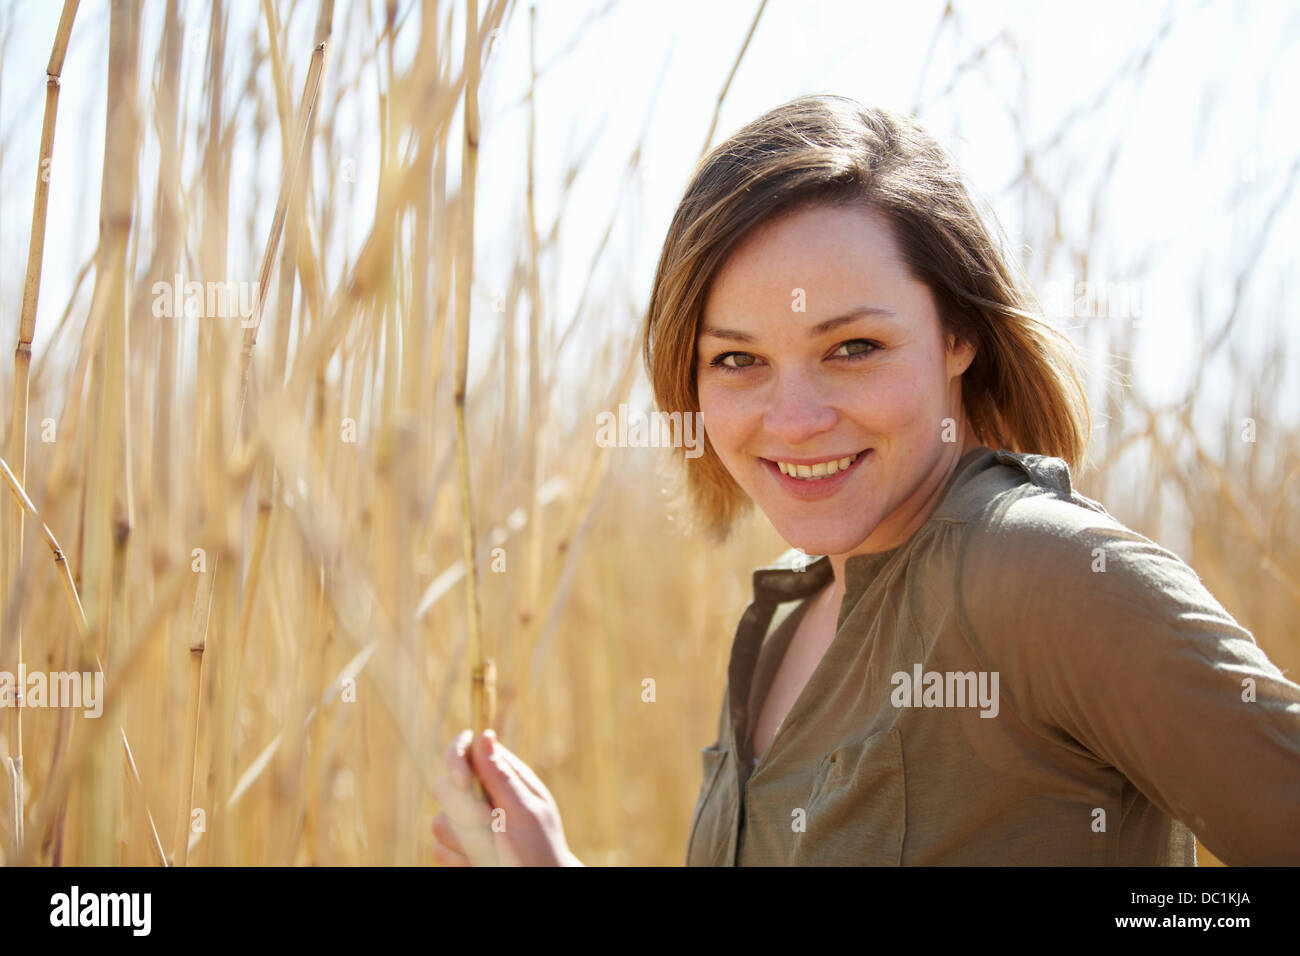 Portrait of young woman in front of reeds Stock Photo